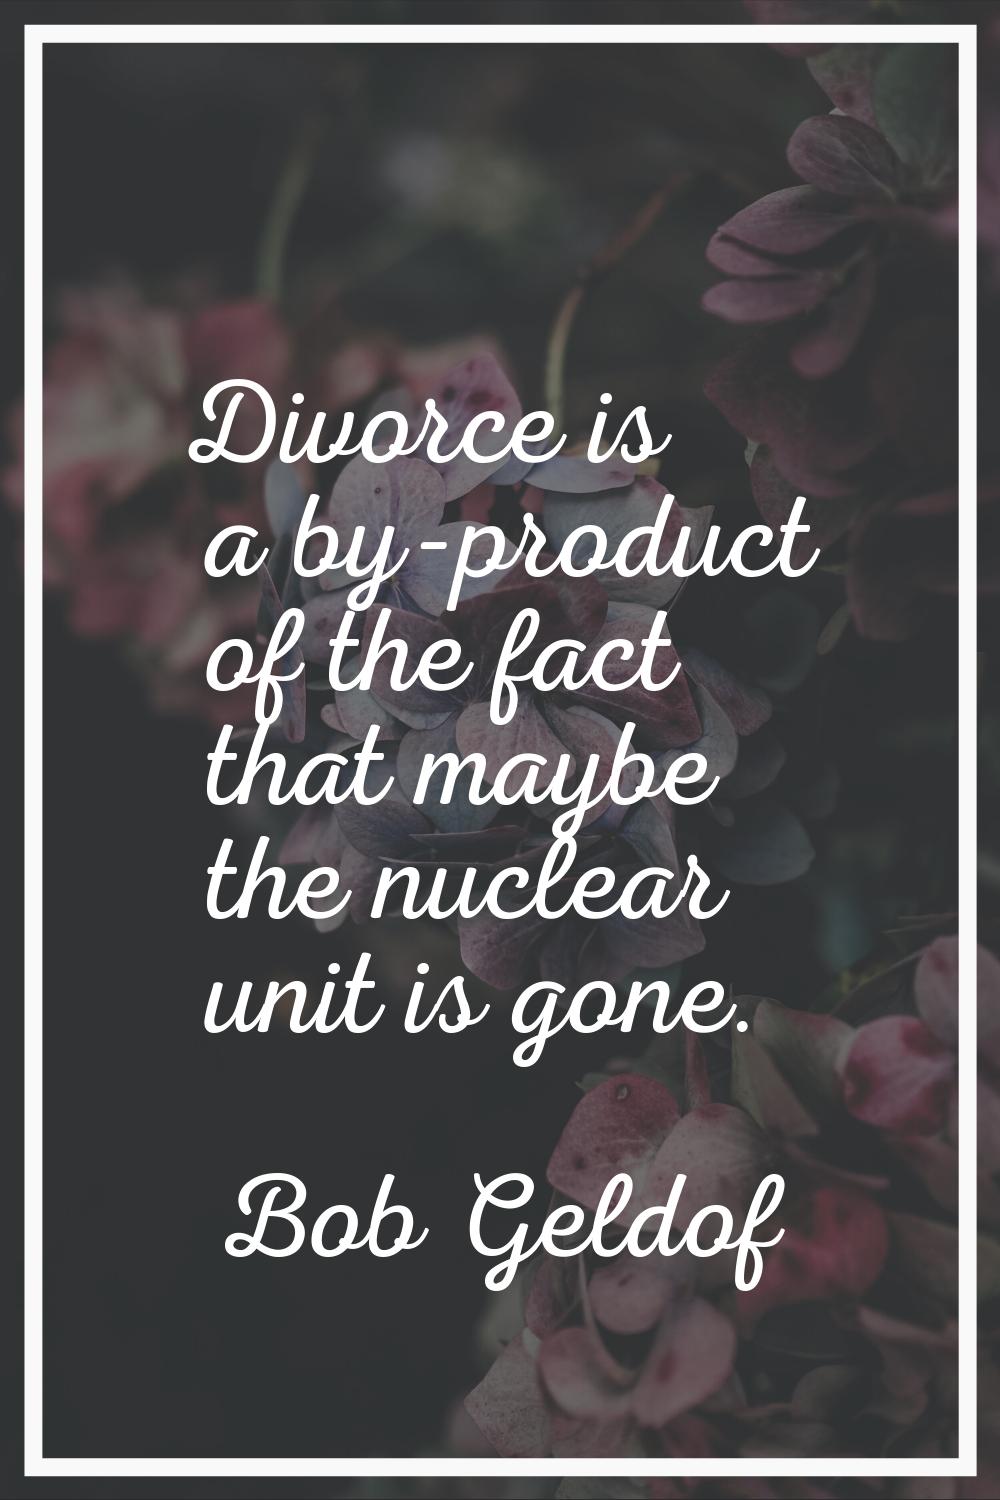 Divorce is a by-product of the fact that maybe the nuclear unit is gone.